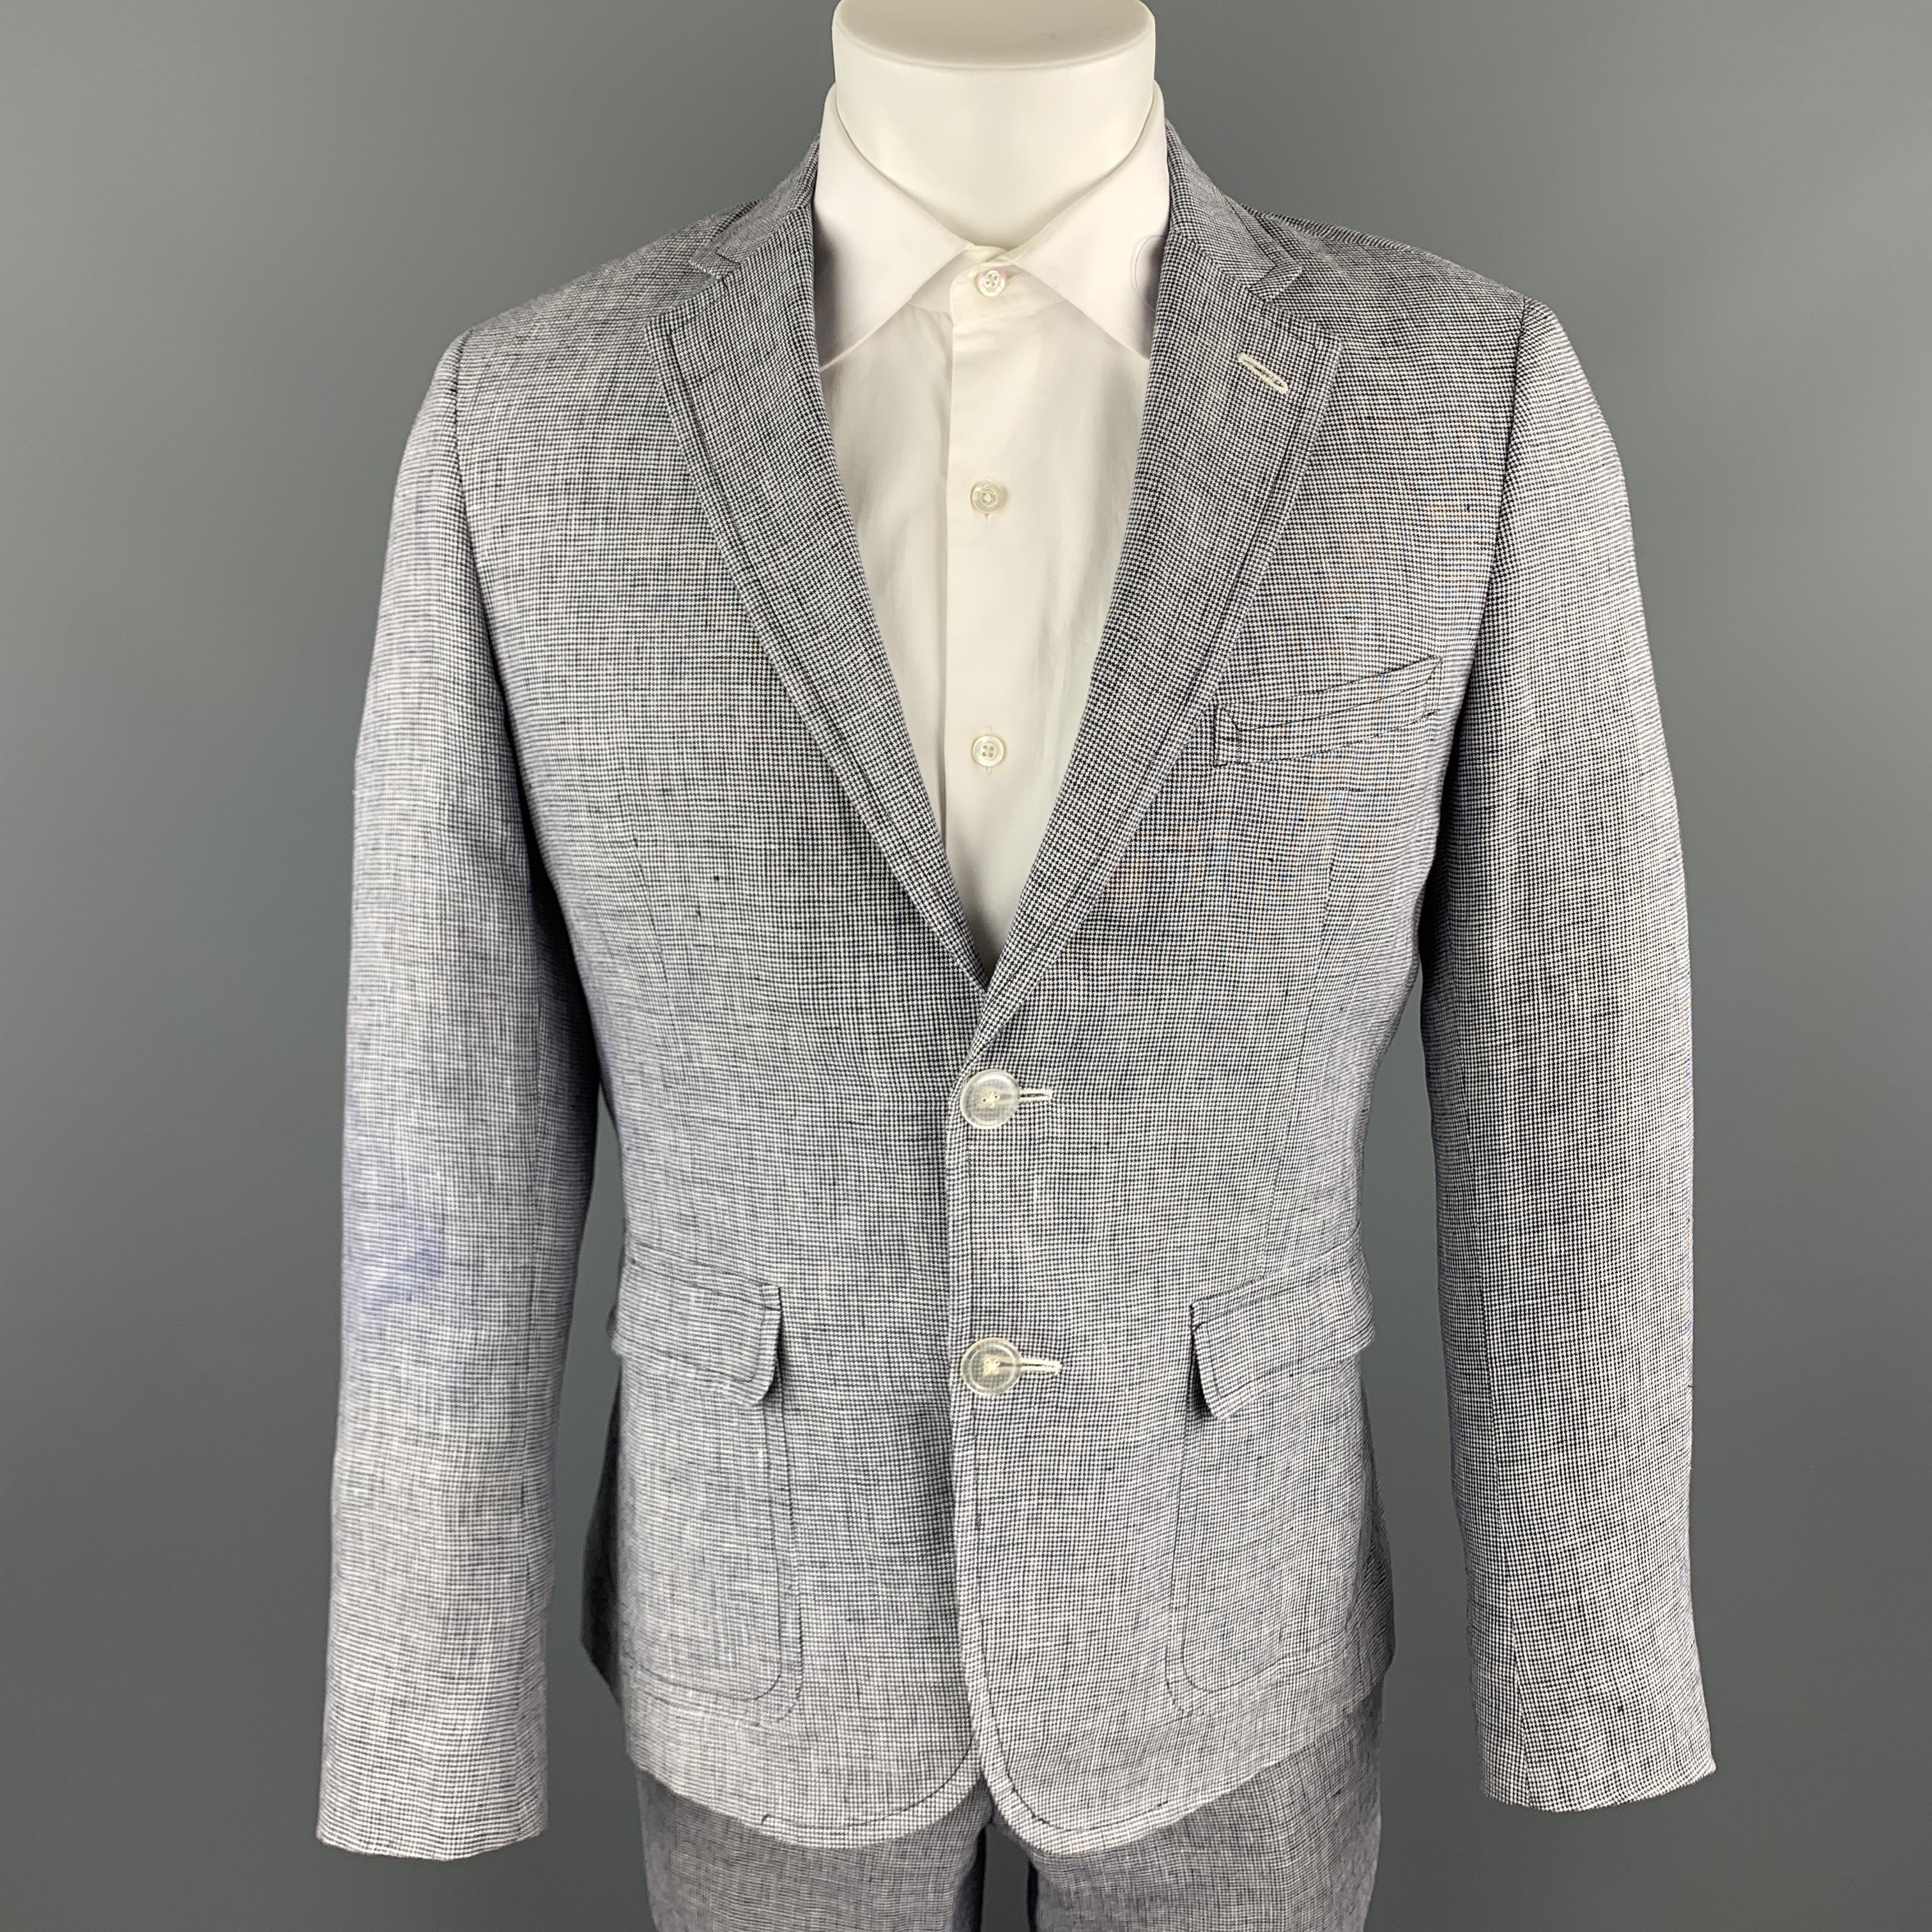 BAND OF OUTSIDERS suit comes in white and navy micro houndstooth linen and includes a single breasted, two button sport coat with a notch lapel and  matching flat front trousers. Made in the USA.

Excellent Pre-Owned Condition.
Marked: